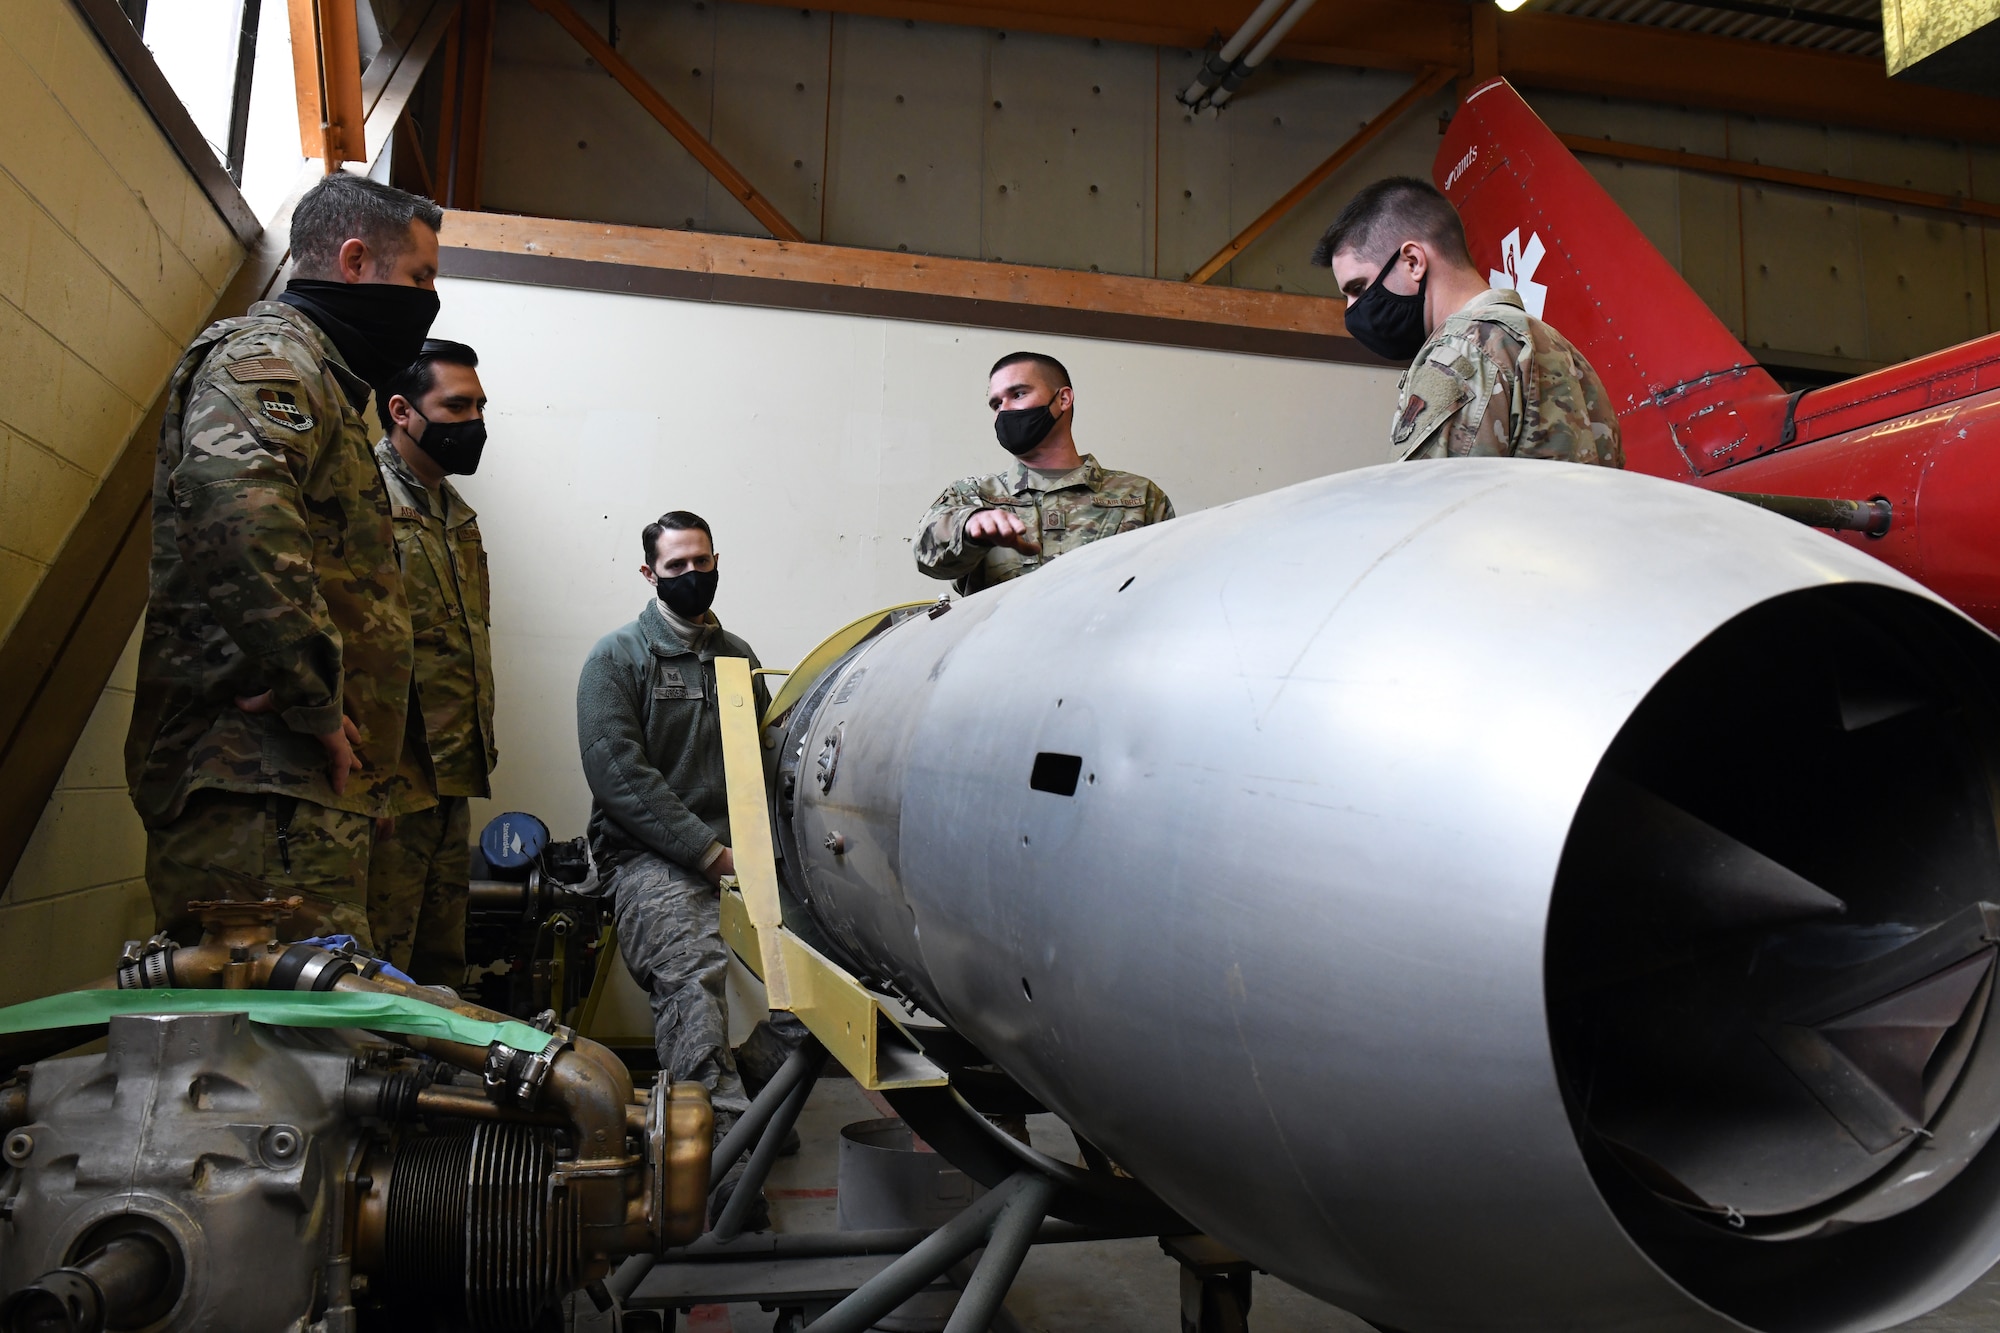 Senior Master Sgt. Matthew Parker, 349th Maintenance Group quality assurance superintendent, center right, talks with Airmen assigned to Beale Air Force Base about the Fairchild J44 turbojet, Feb. 16, 2021, at Travis Air Force Base, California. The Airmen visited Travis to learn about the various components on different types of aircraft. (U.S. Air Force photo by Airman 1st Class Luis A. Ruiz-Vazquez)